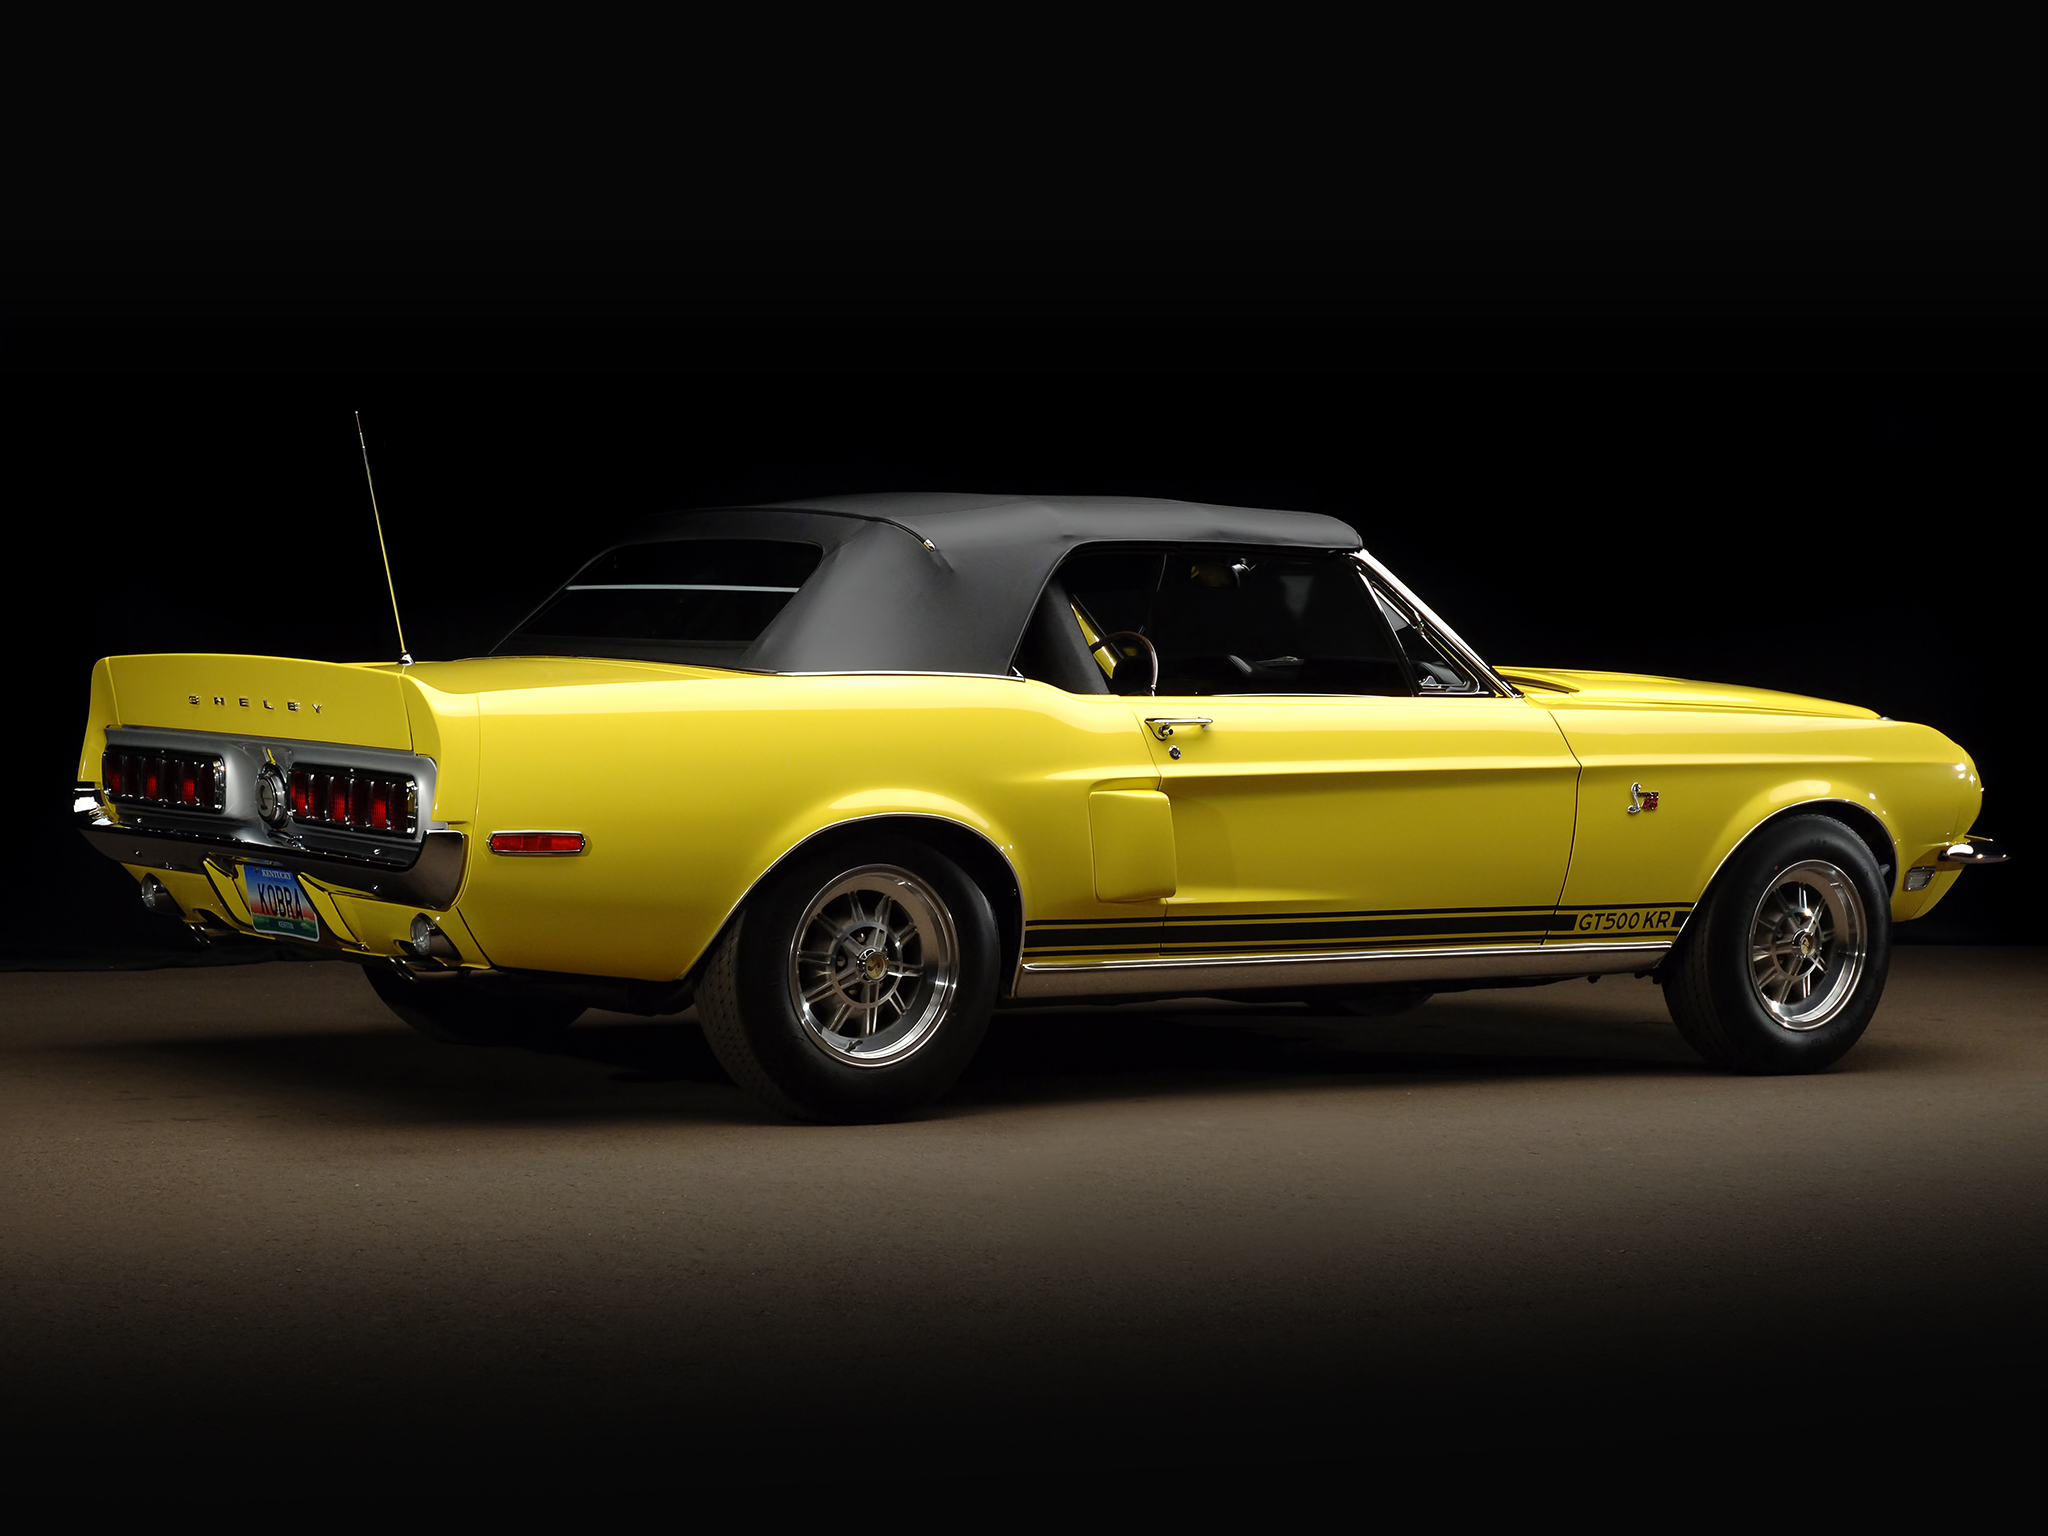 1968, Shelby, Gt500 kr, Gt500, Convertible, Ford, Mustang, Muscle, Classic, G t Wallpaper